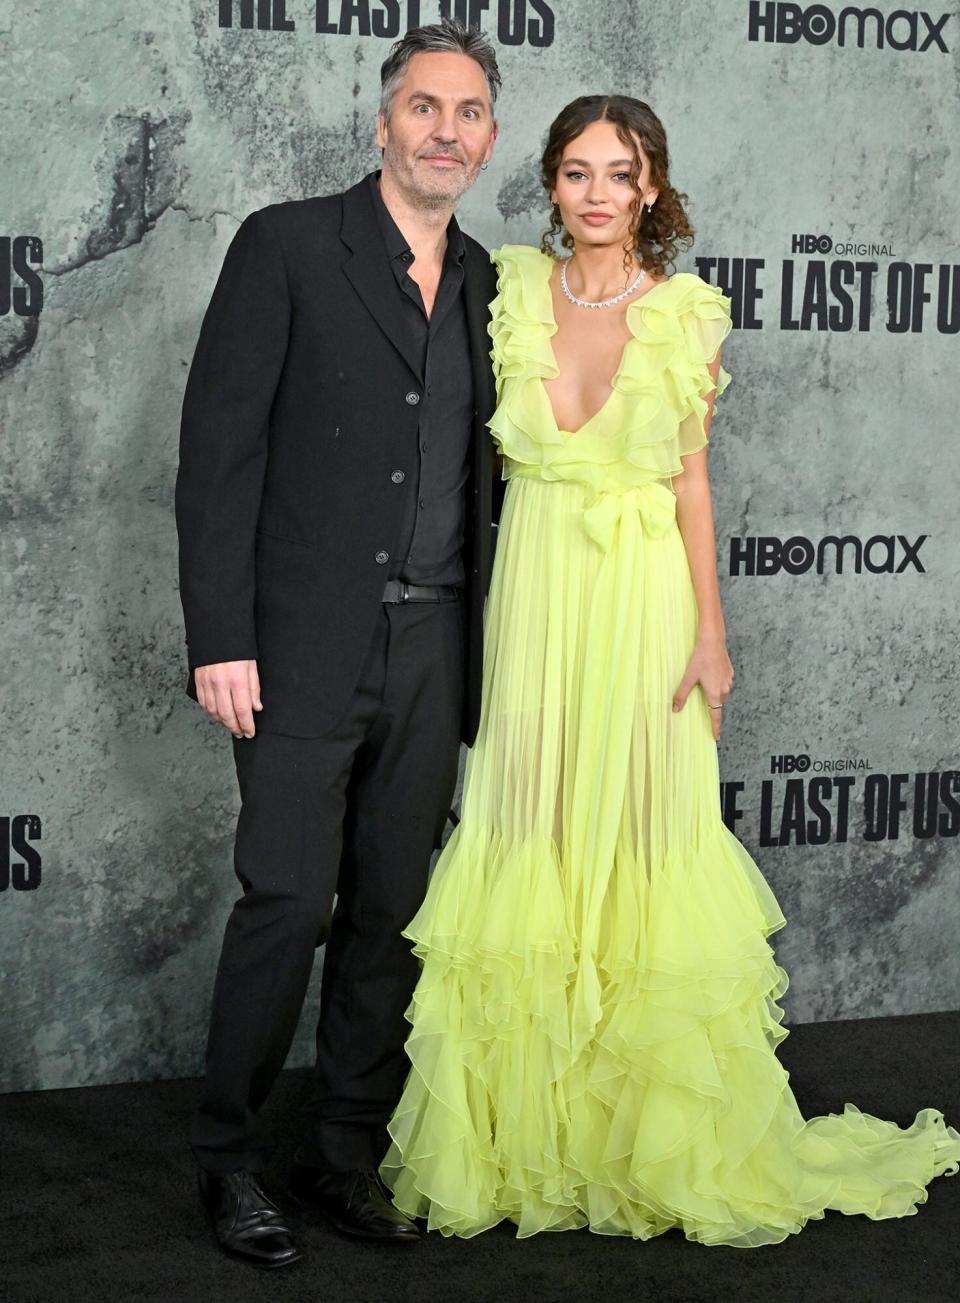 Ol Parker and Nico Parker attend the Los Angeles Premiere of HBO's "The Last of Us"